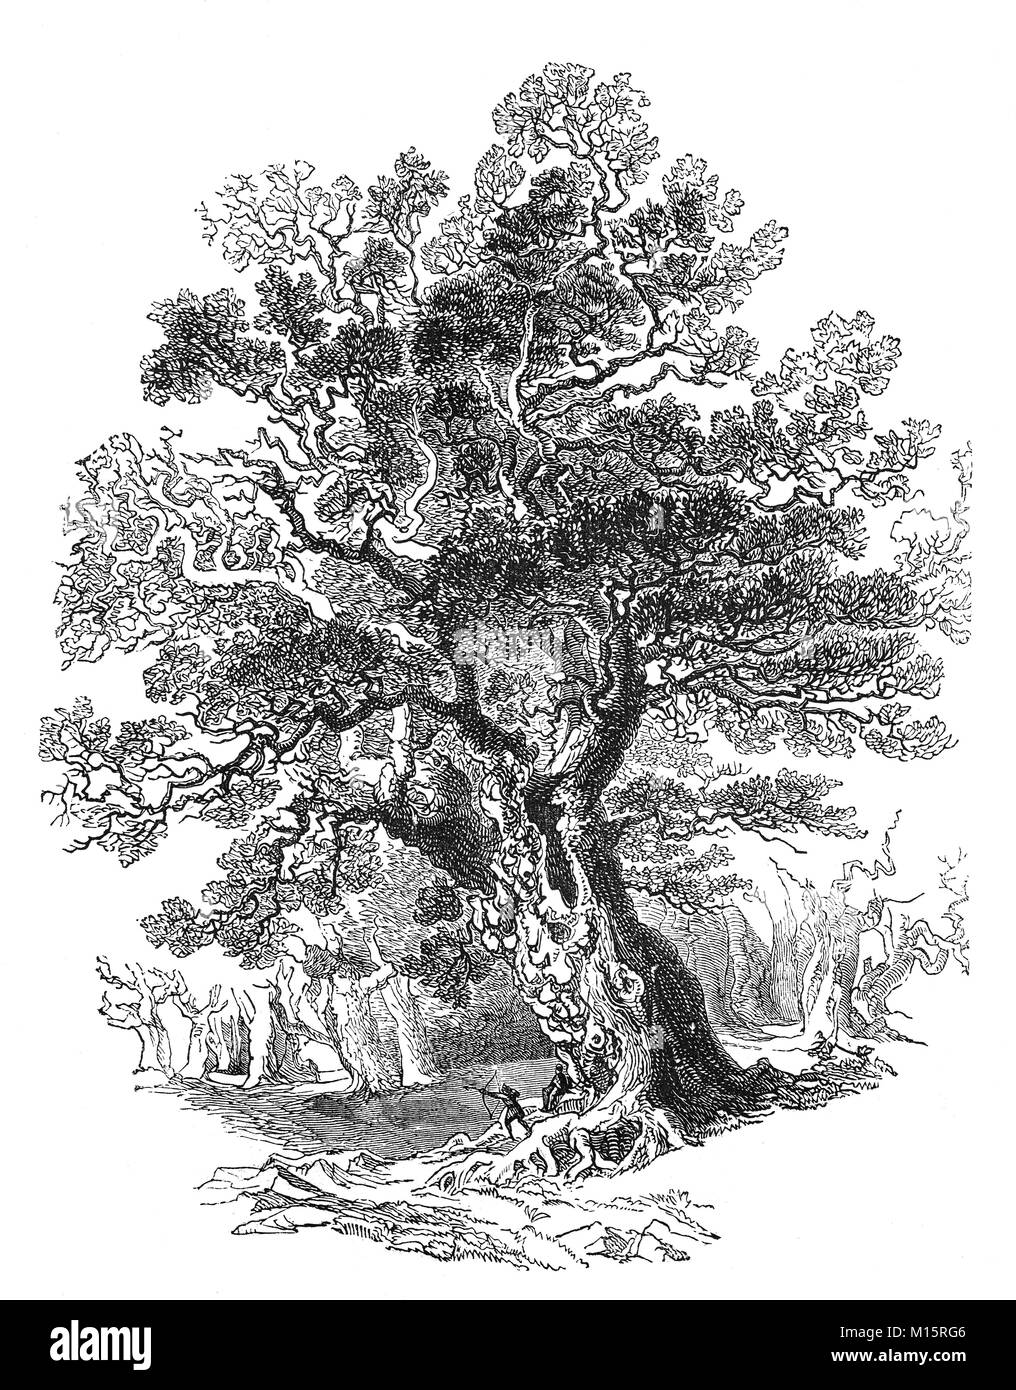 The 'Forest King'. One of the oak trees in Sherwood Forest, in Nottinghamshire at the time of Robin Hood, generally thought to be in 14th Century England. Stock Photo